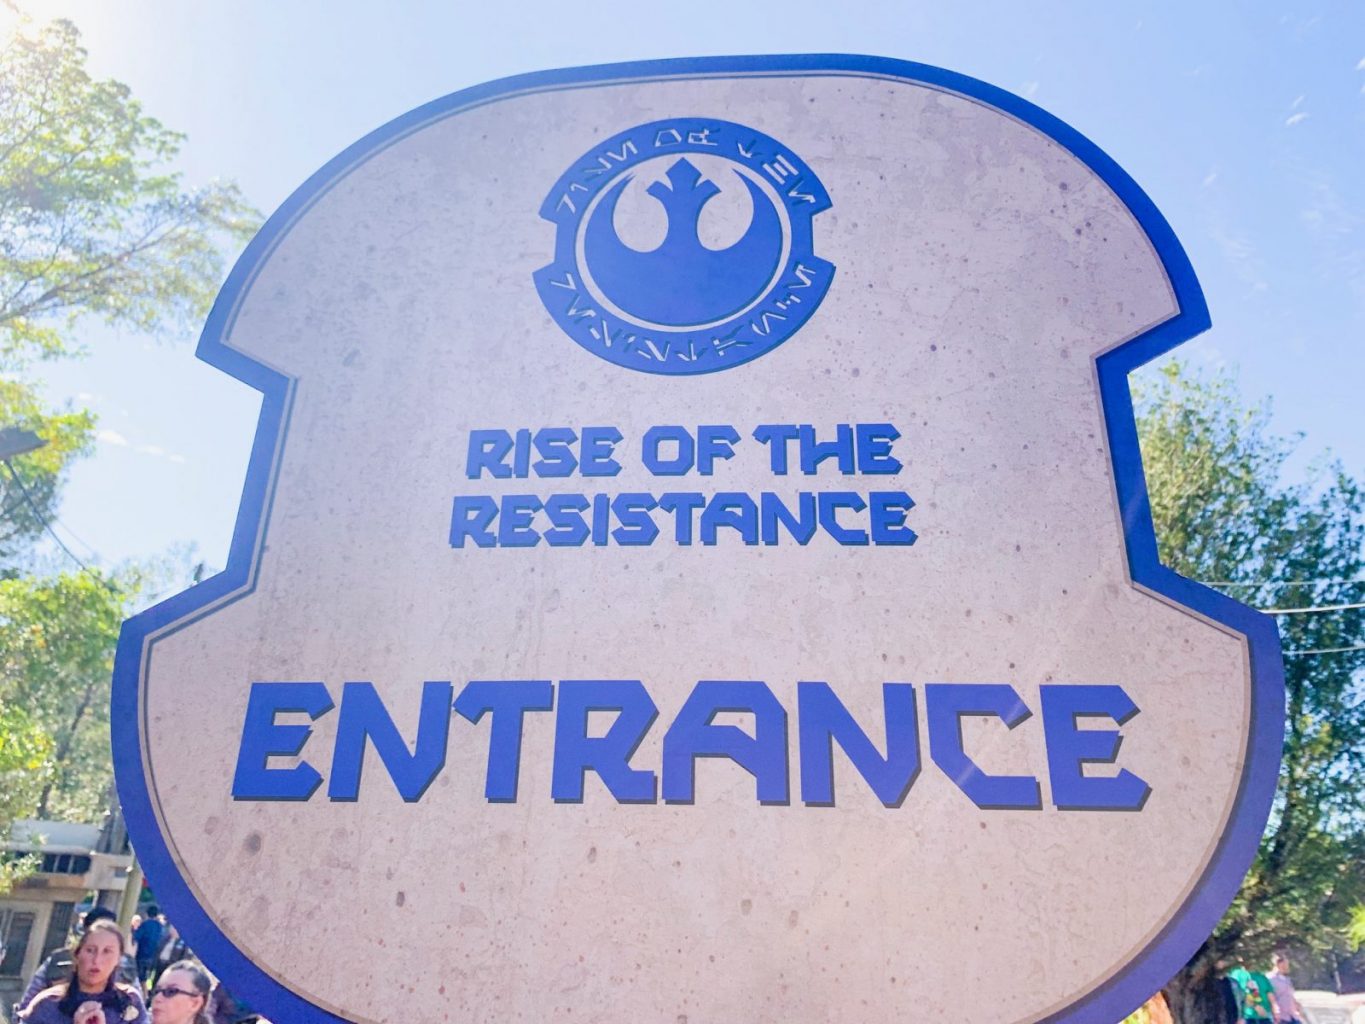 Things To Do In Disney World Rise of the Resistance